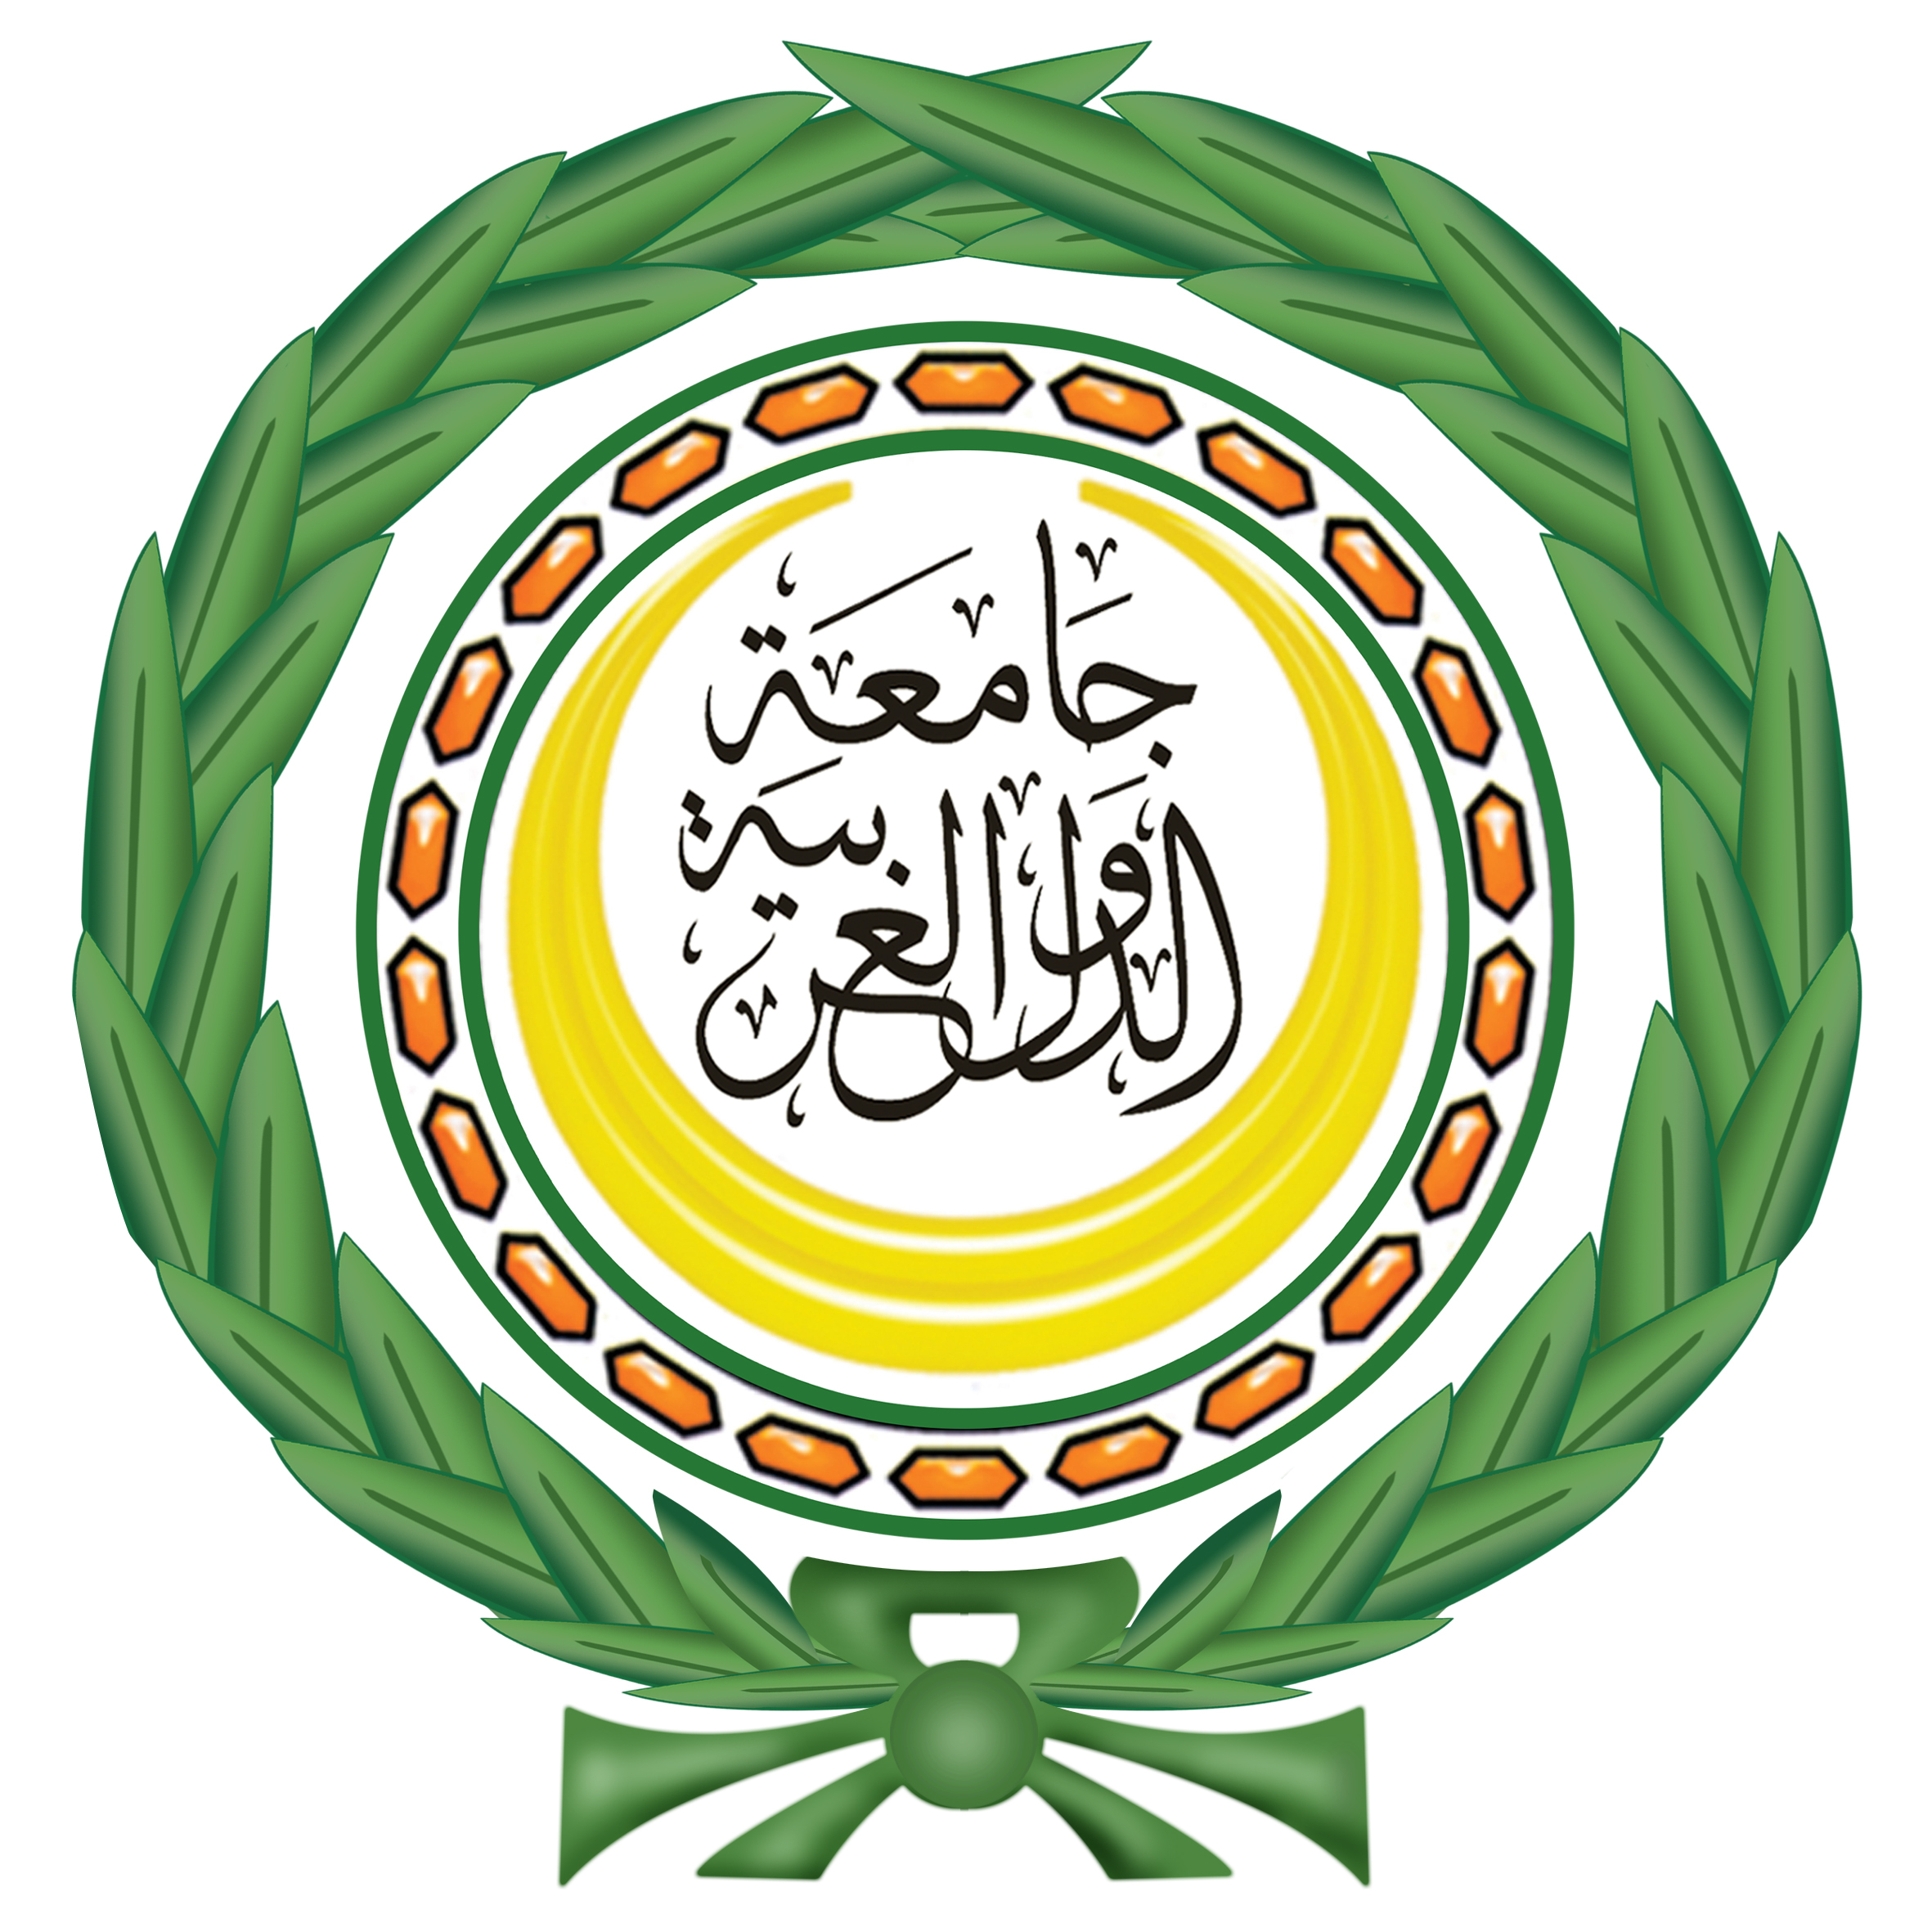 An emergency meeting of the Council of the Arab League to discuss the situation in Gaza